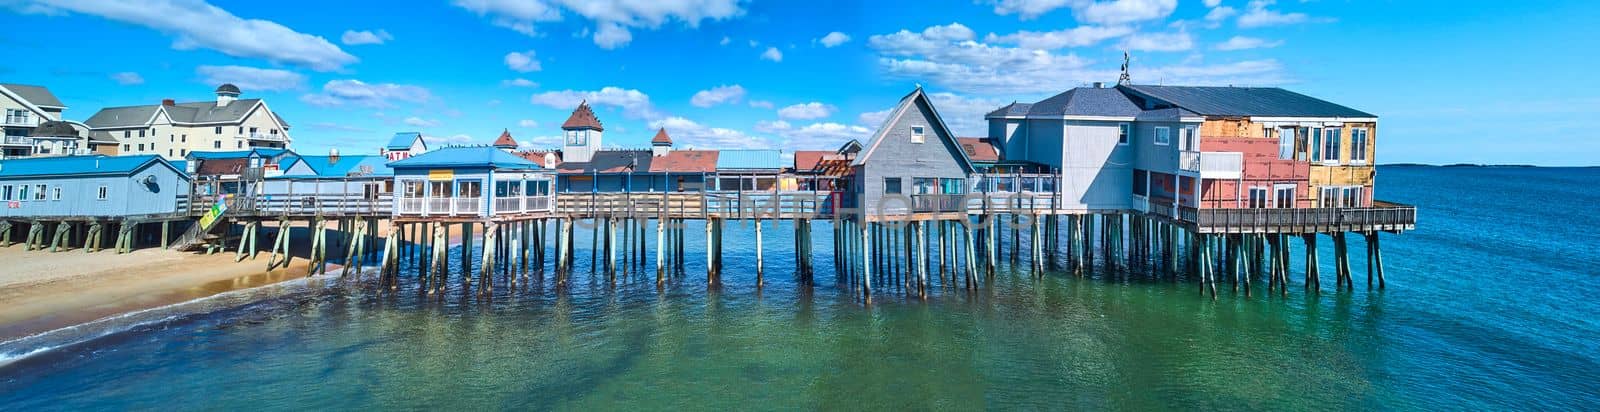 Image of Stunning side profile of entire old wood pier in Maine covered in shops and buildings on beach